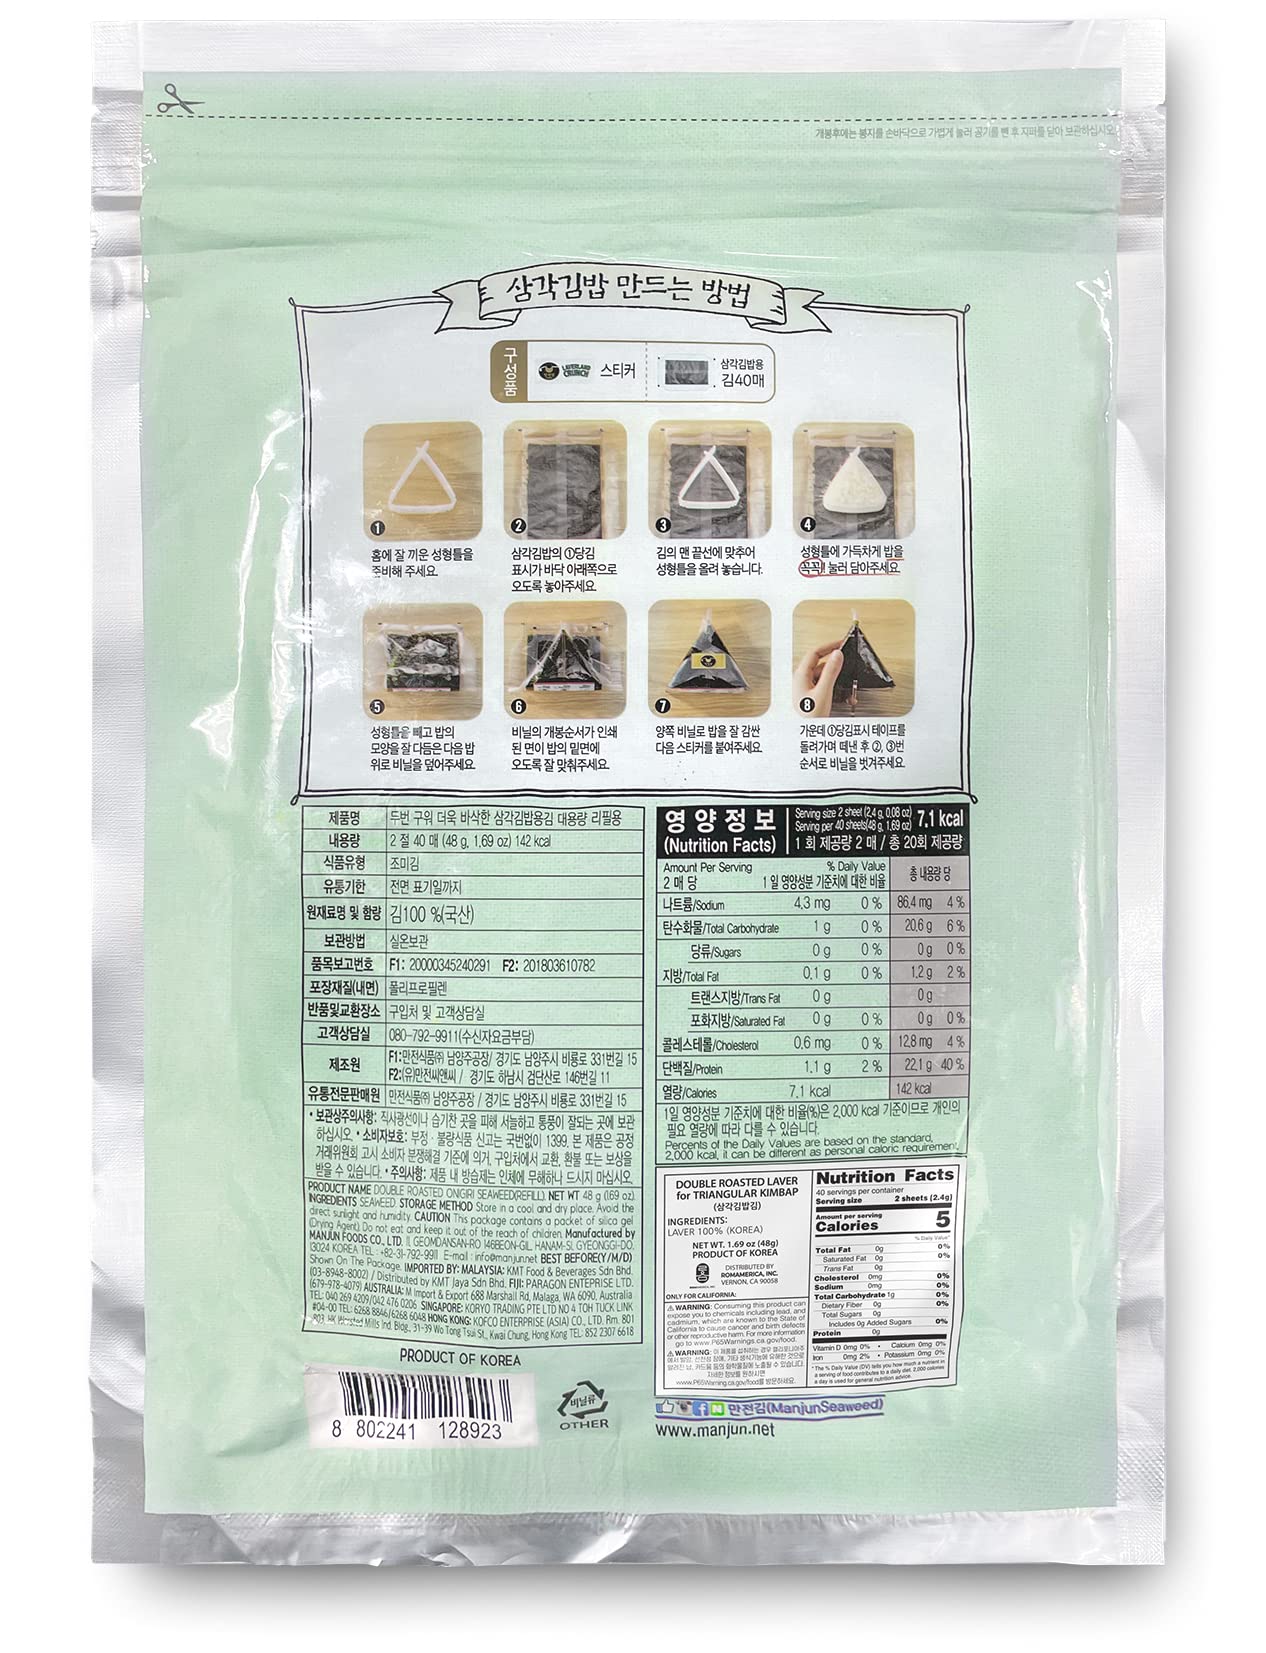 ROM AMERICA Onigiri Nori Sushi Triangle Rice Ball Dried Seaweed Laver Wrappers Refill - 40 Sheets (Pack of 1)